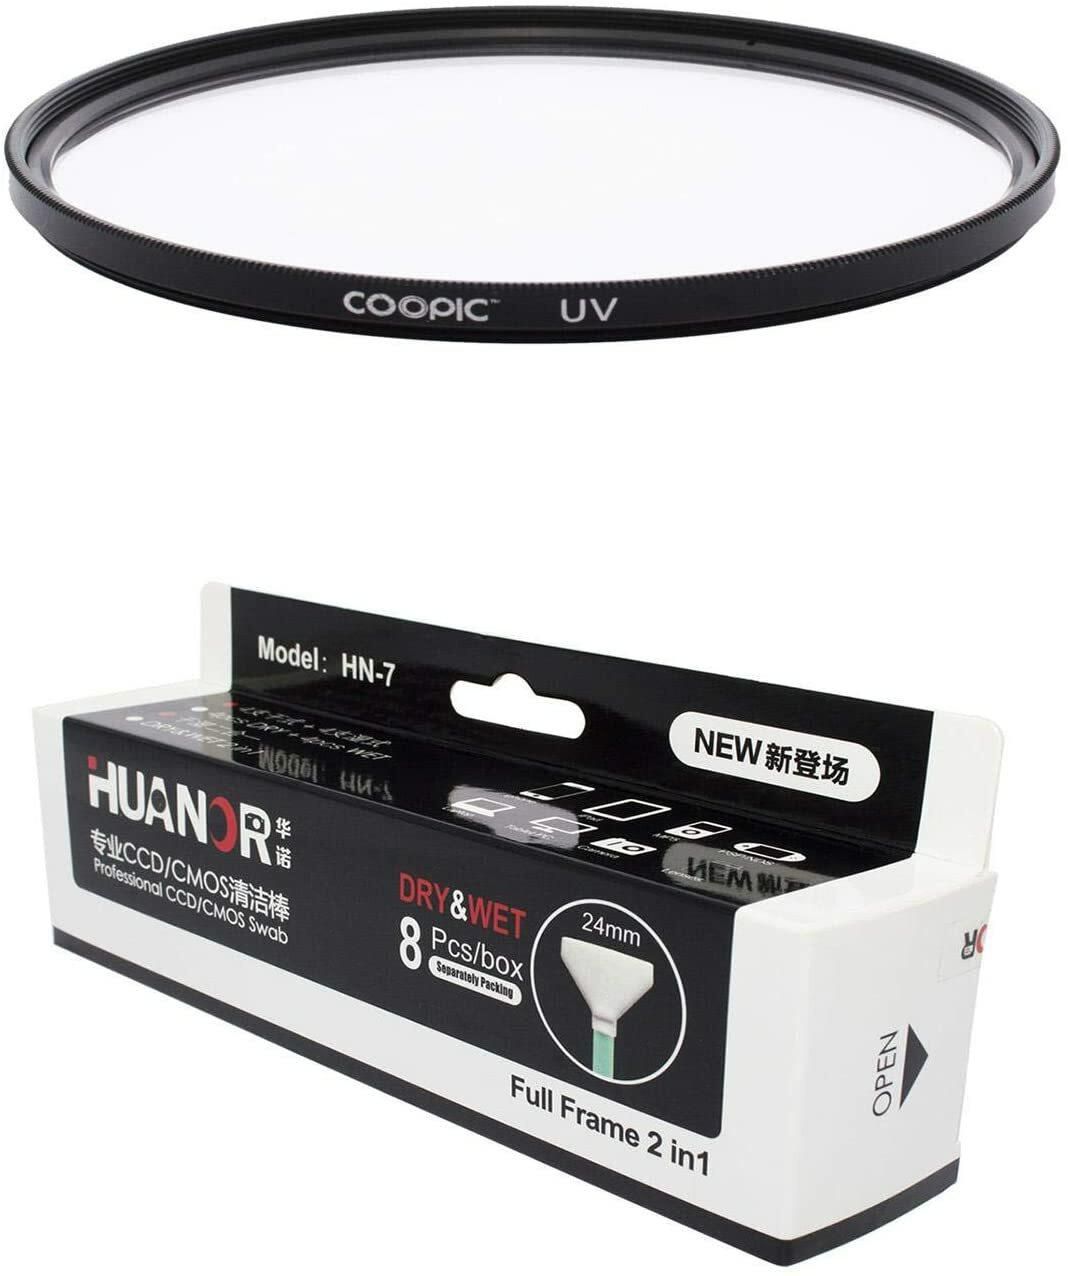 Coopic 52mm Uv Lens Protective Filter With 8Pcs Huanor Hn7 24mm Dry &amp; Wet Professional Ccd/cmos Swab Camera Sensor Cleaner For All Cameras